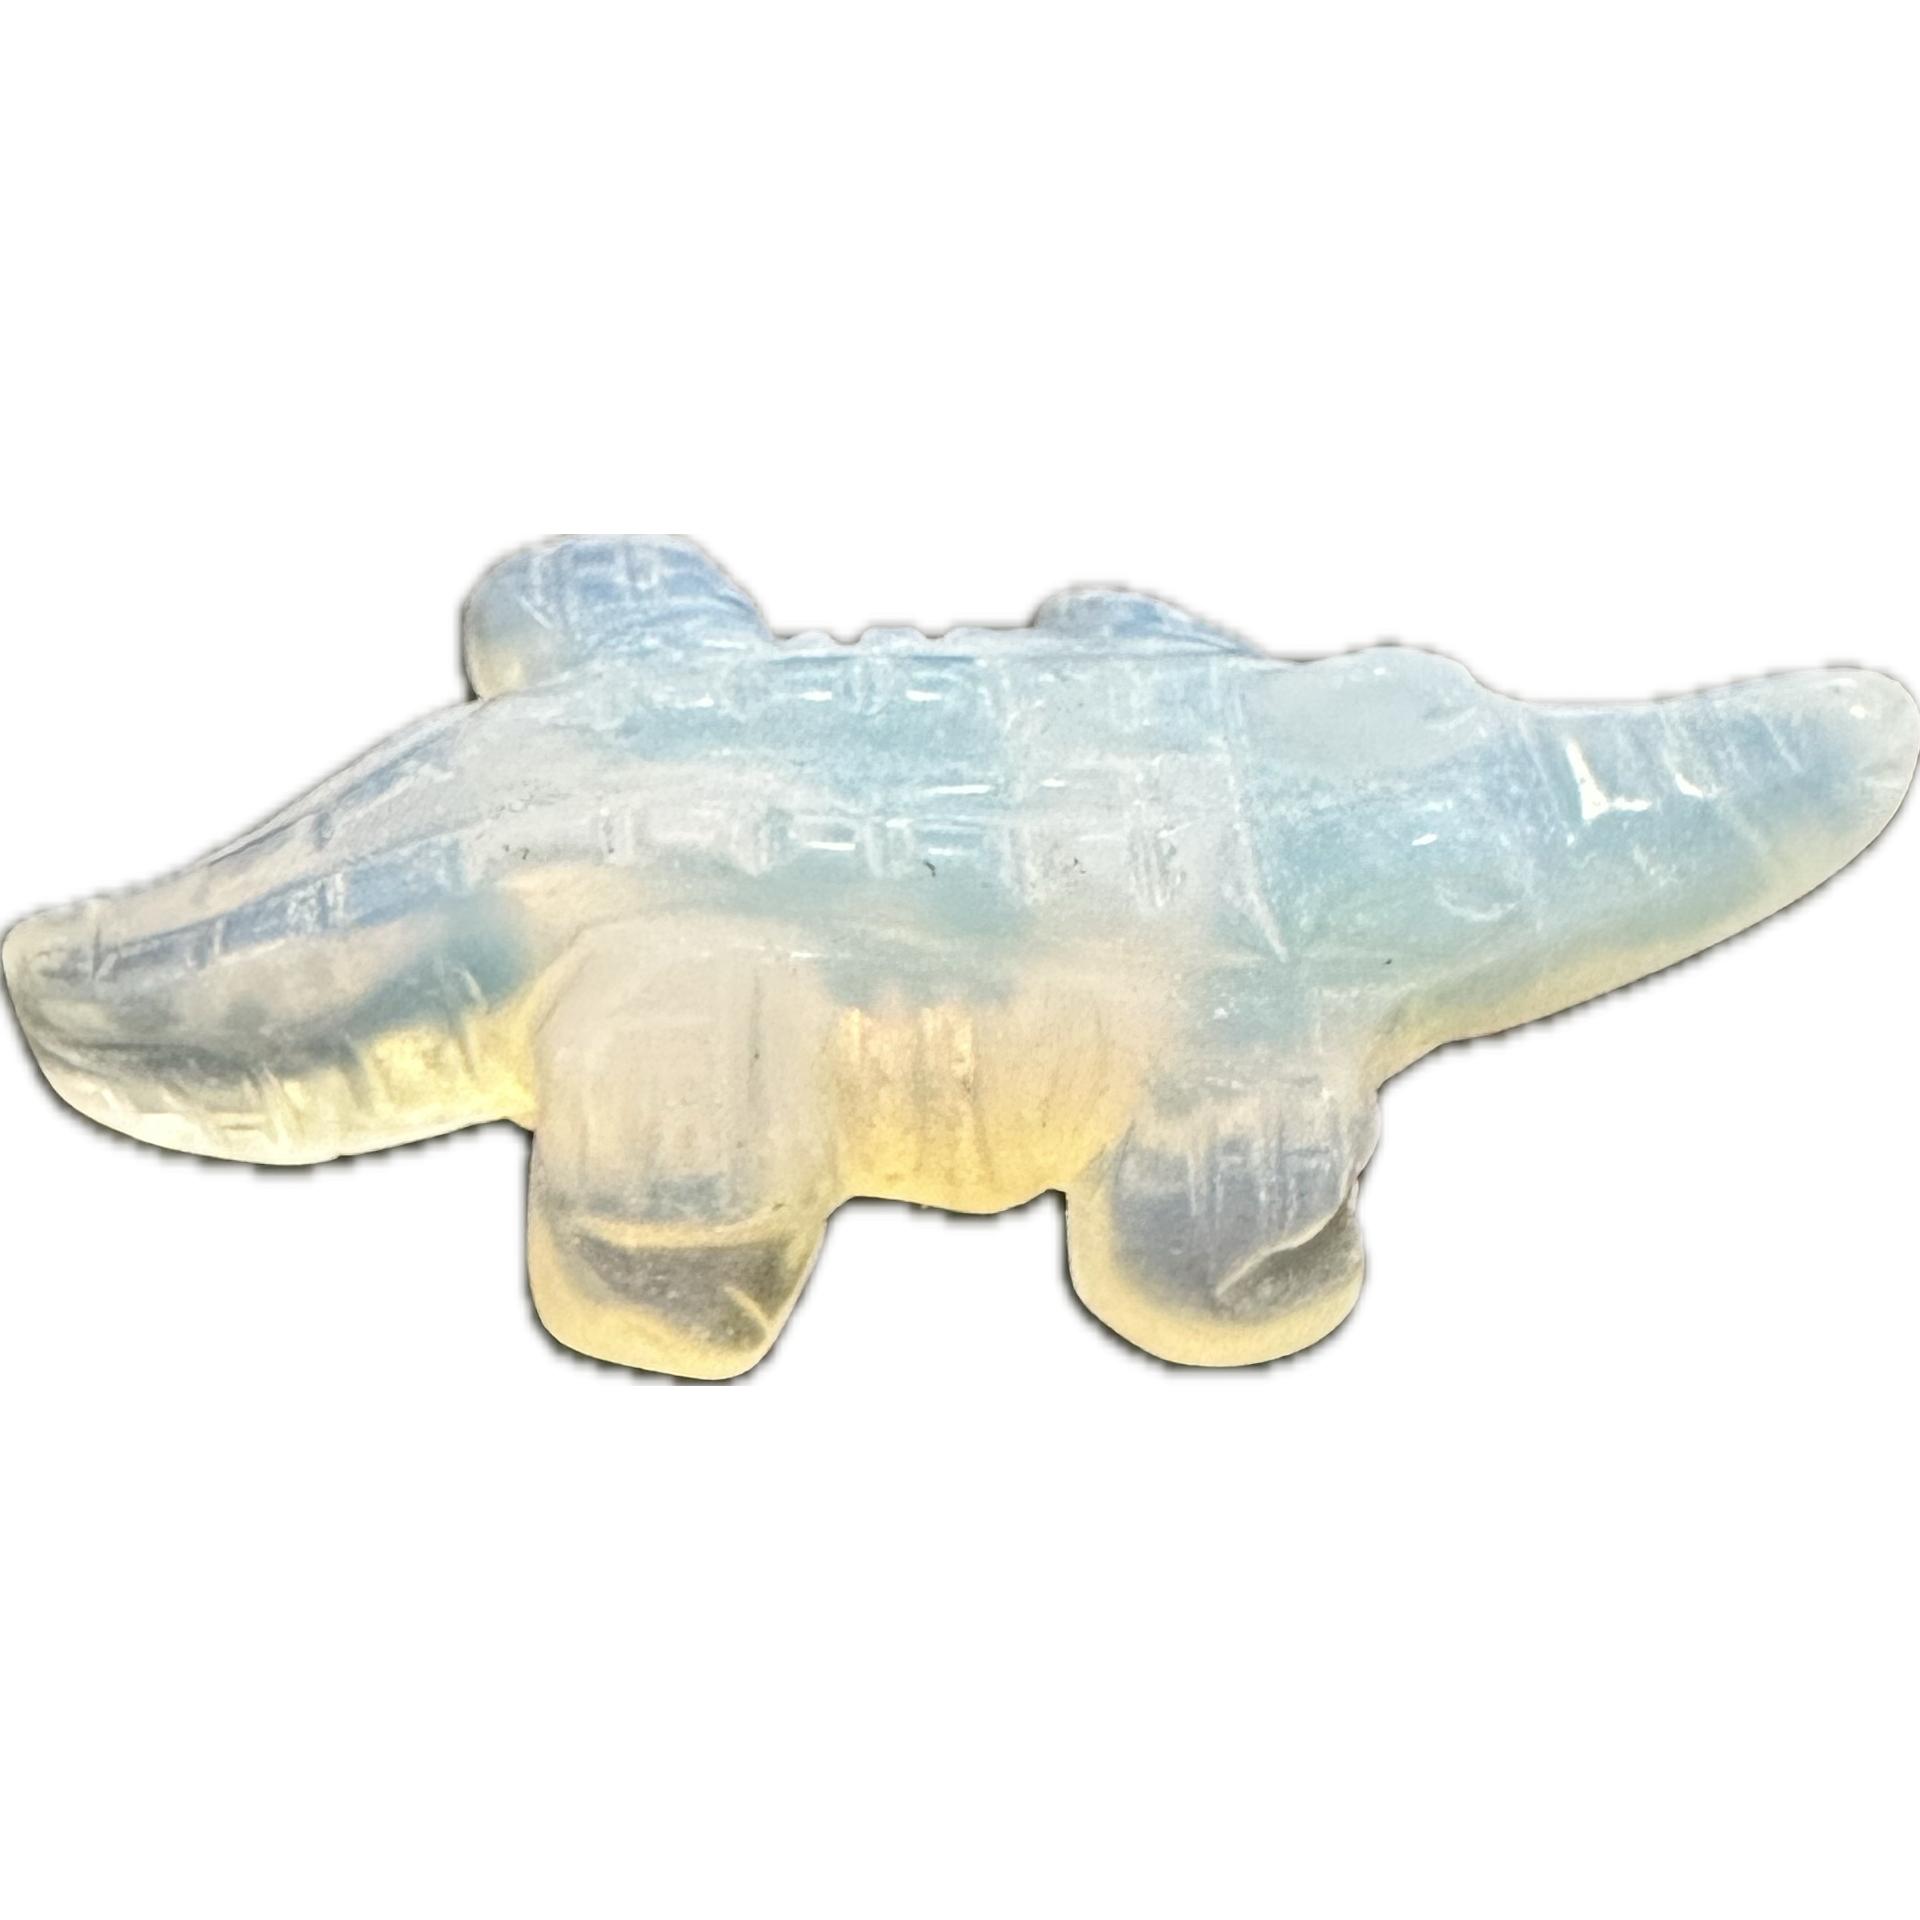 Opalite Alligator, 2 3/8 inches, Hand Carved Prehistoric Online